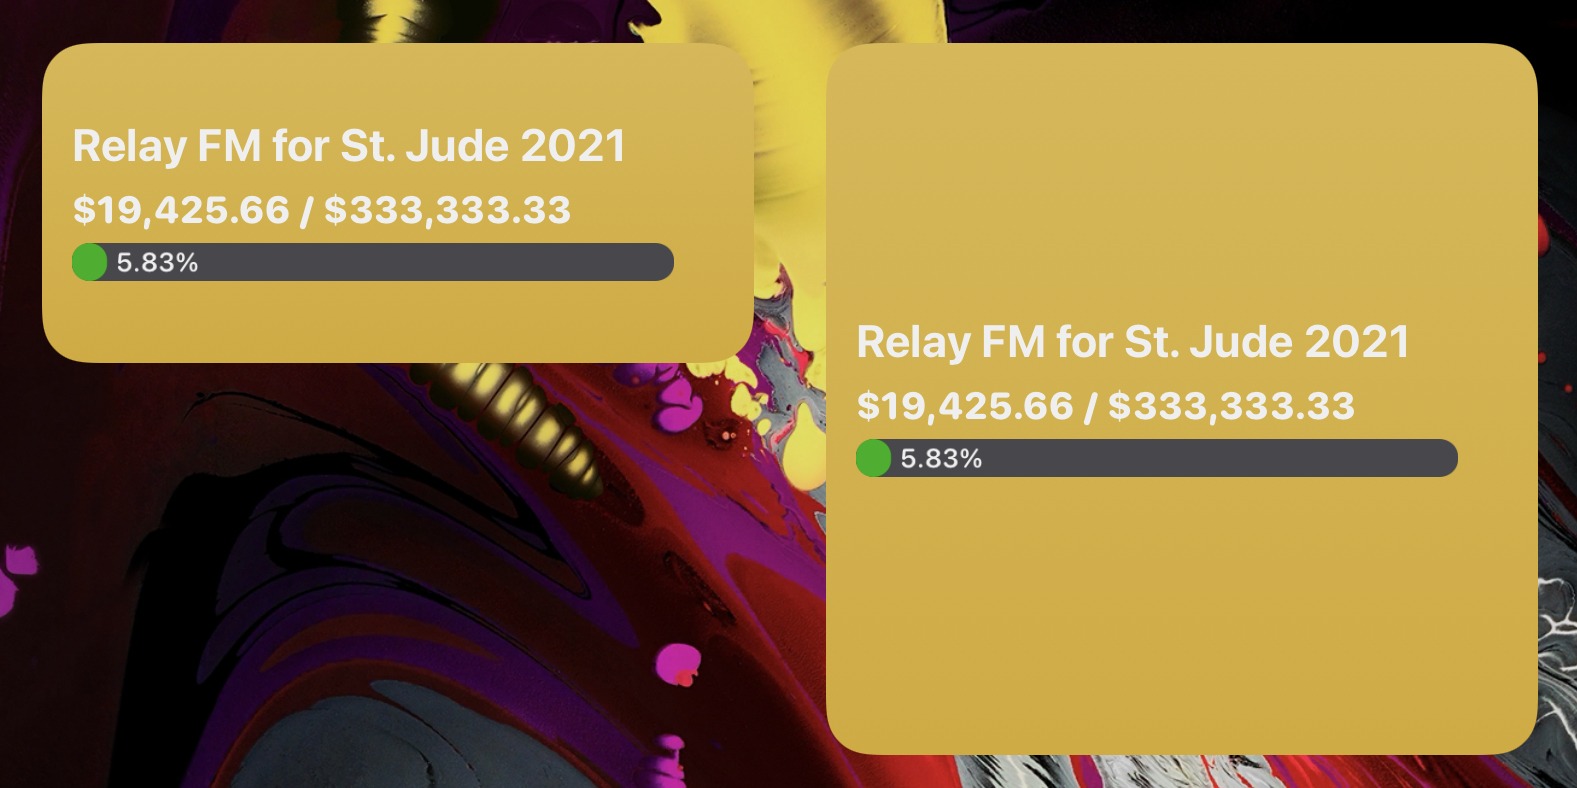 A medium and a large widget displaying the current percentage of the Relay FM for St. Jude 2021 fundraising campaign